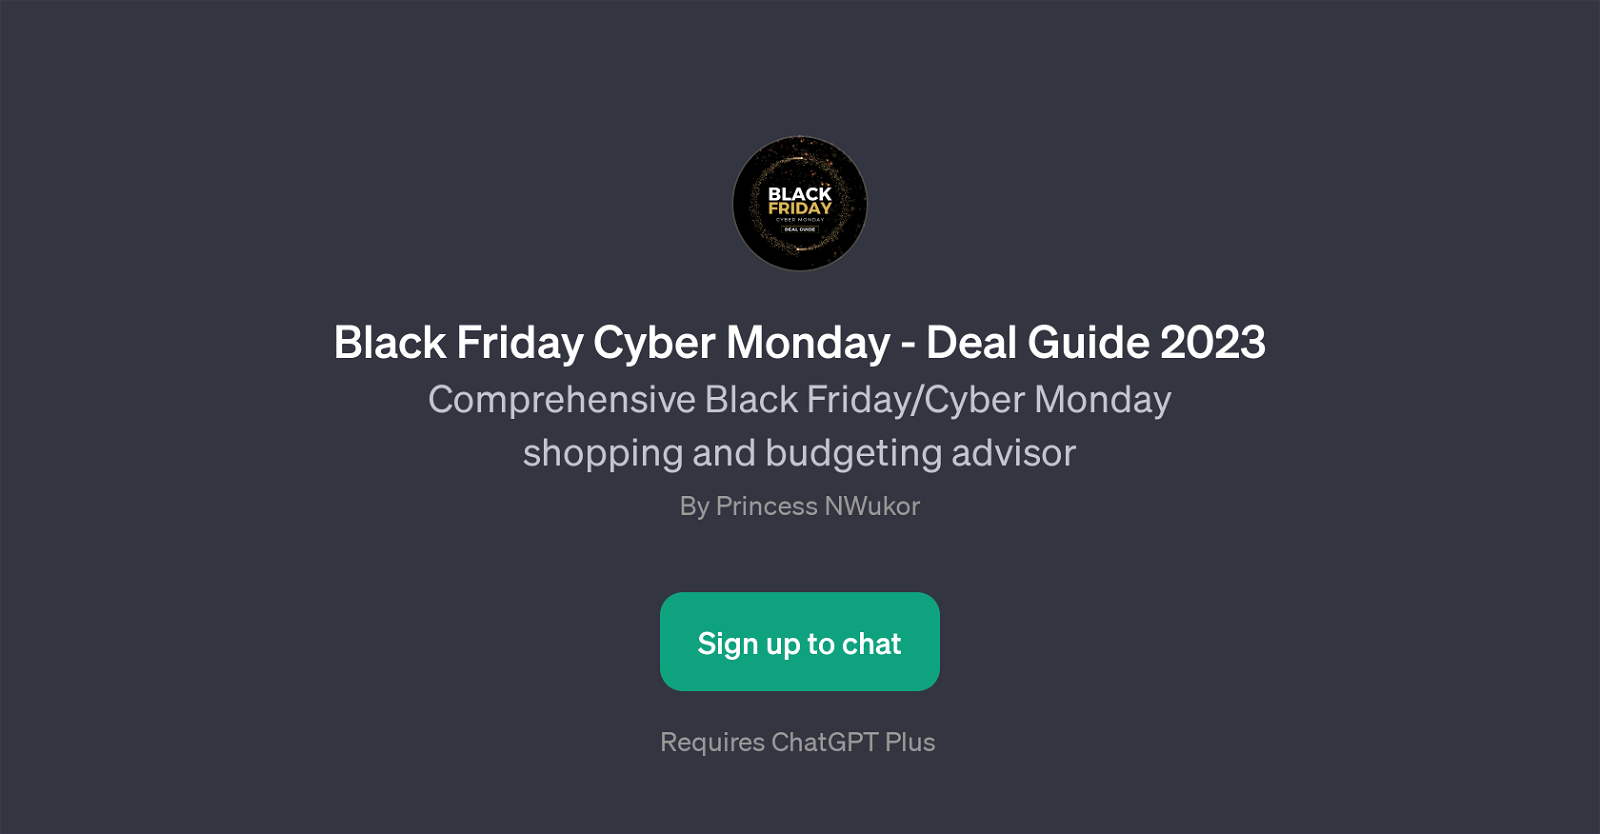 Black Friday Cyber Monday - Deal Guide 2023 website